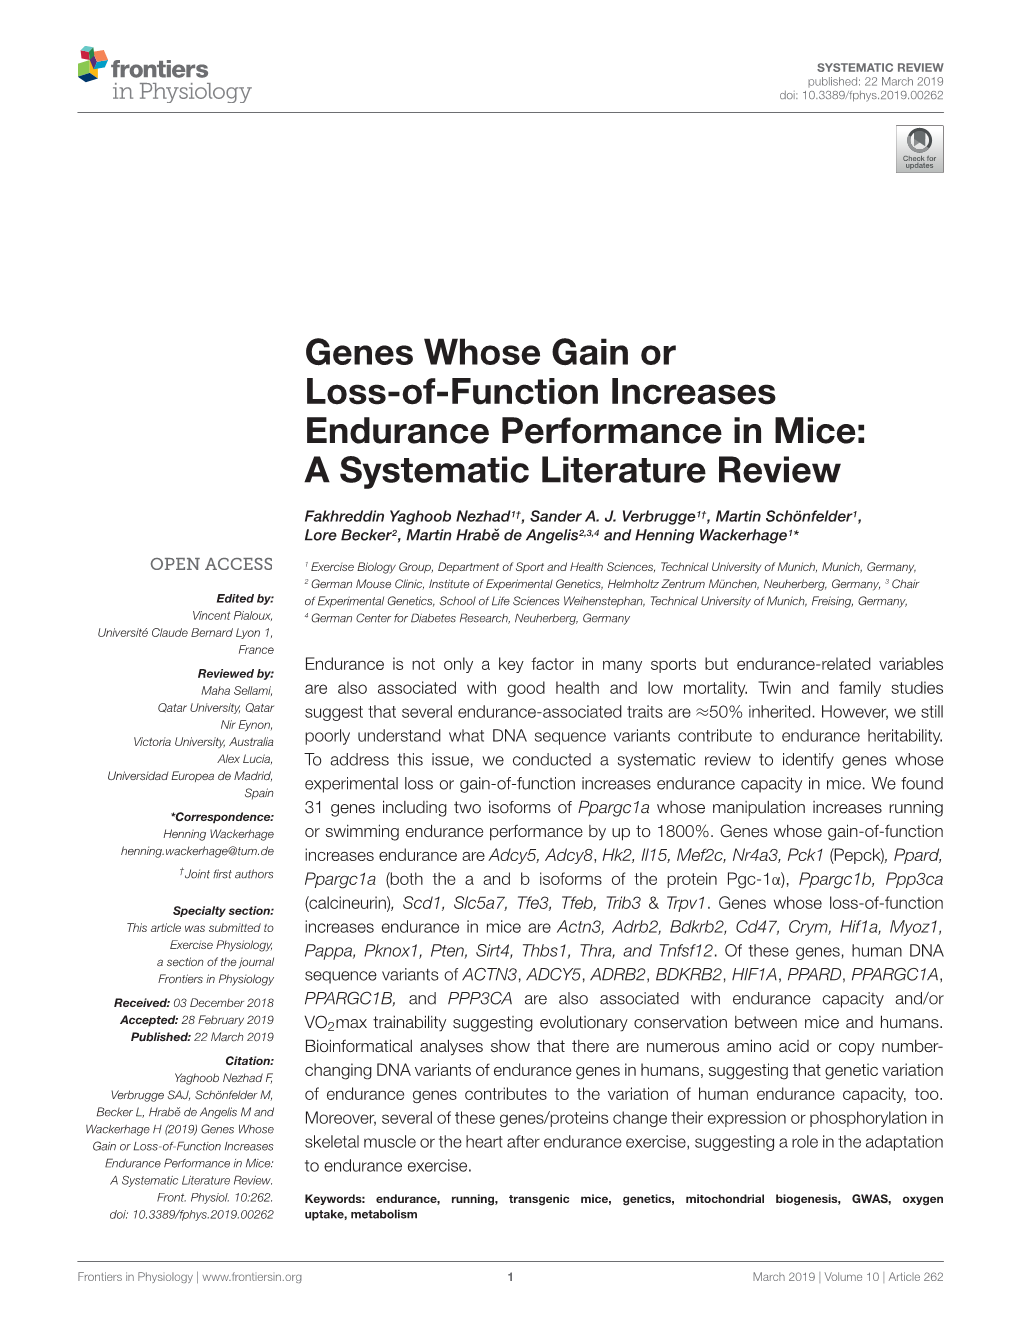 Genes Whose Gain Or Loss-Of-Function Increases Endurance Performance in Mice: a Systematic Literature Review